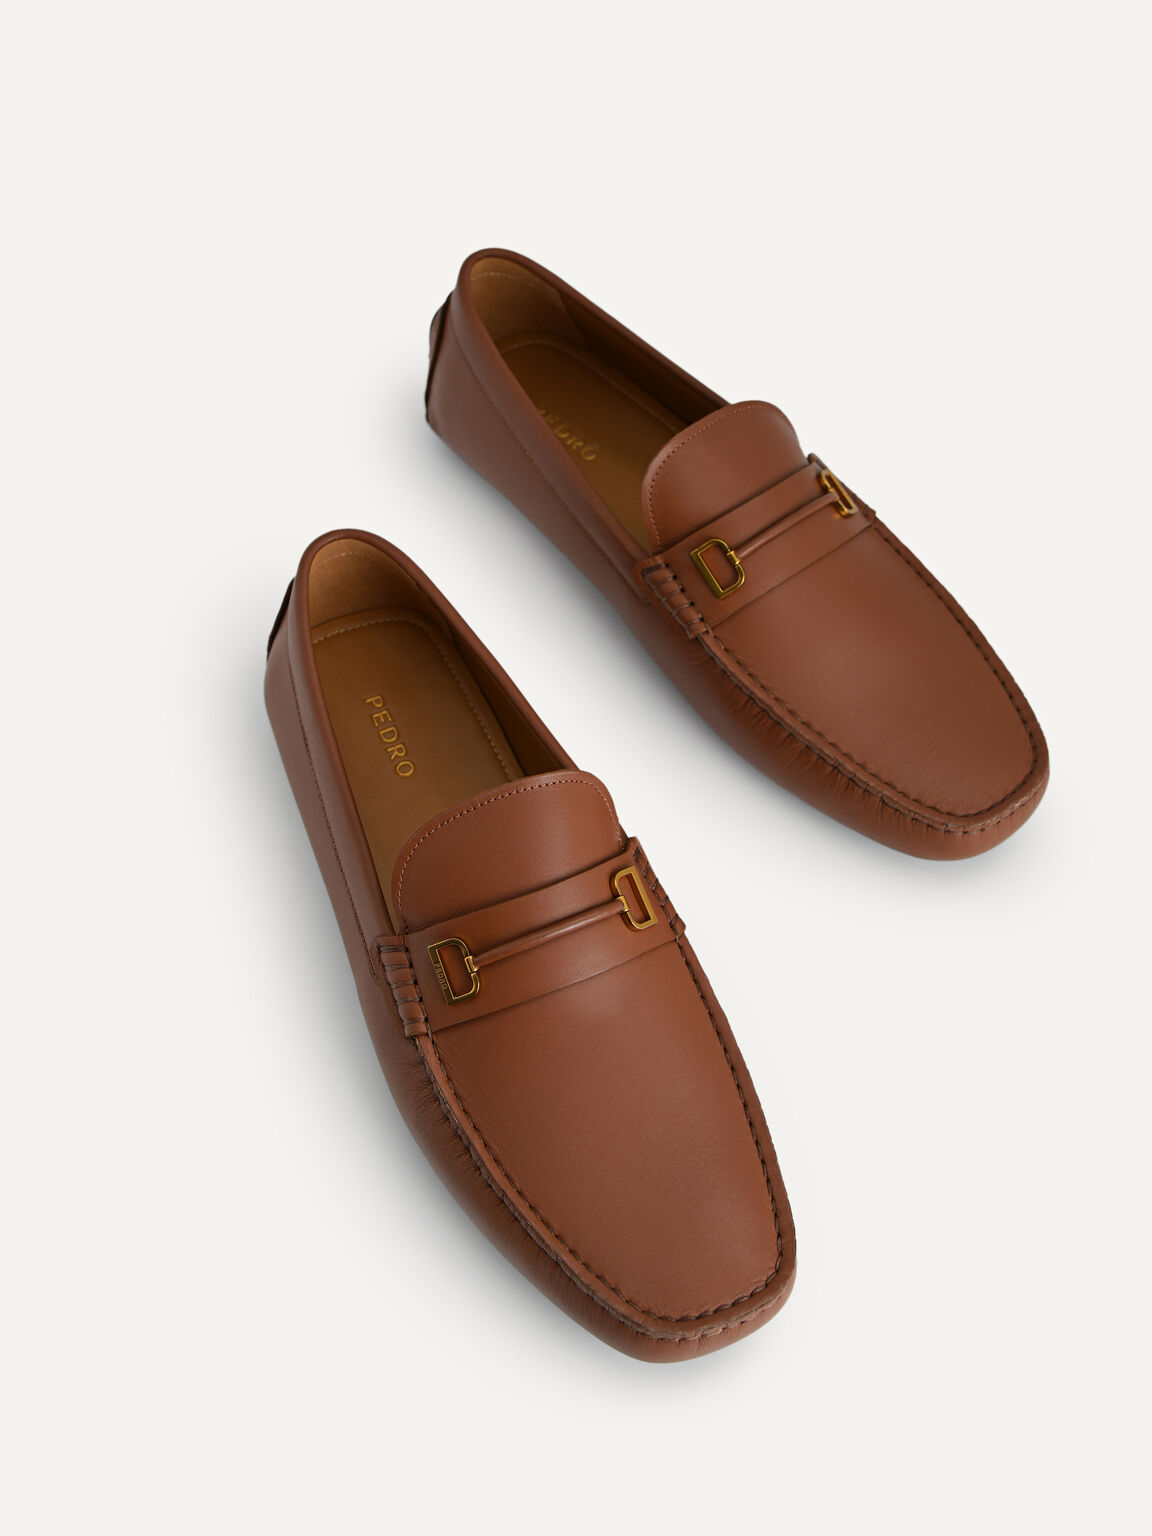 Leather Moccasins with Metal Bit, Cognac